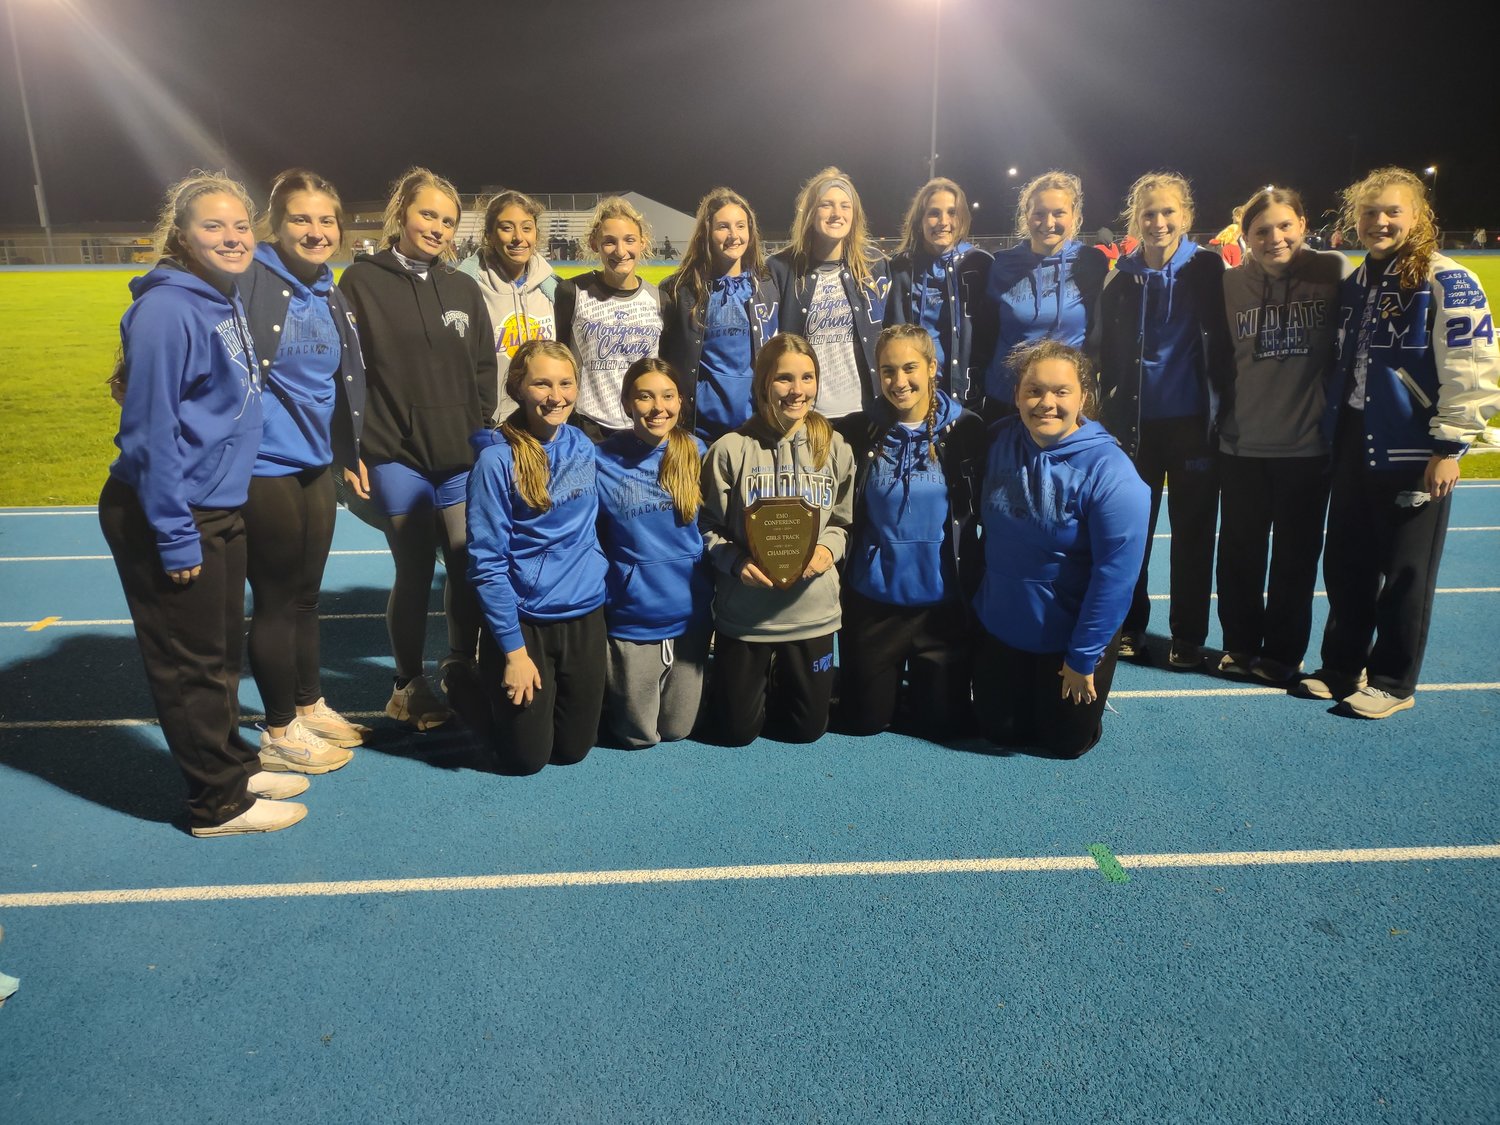 The Montgomery County girls track team poses with its Eastern Missouri Conference championship plaque after winning the 11-team conference meet with 188.5 points on May 3 at Jim Blacklock Field.